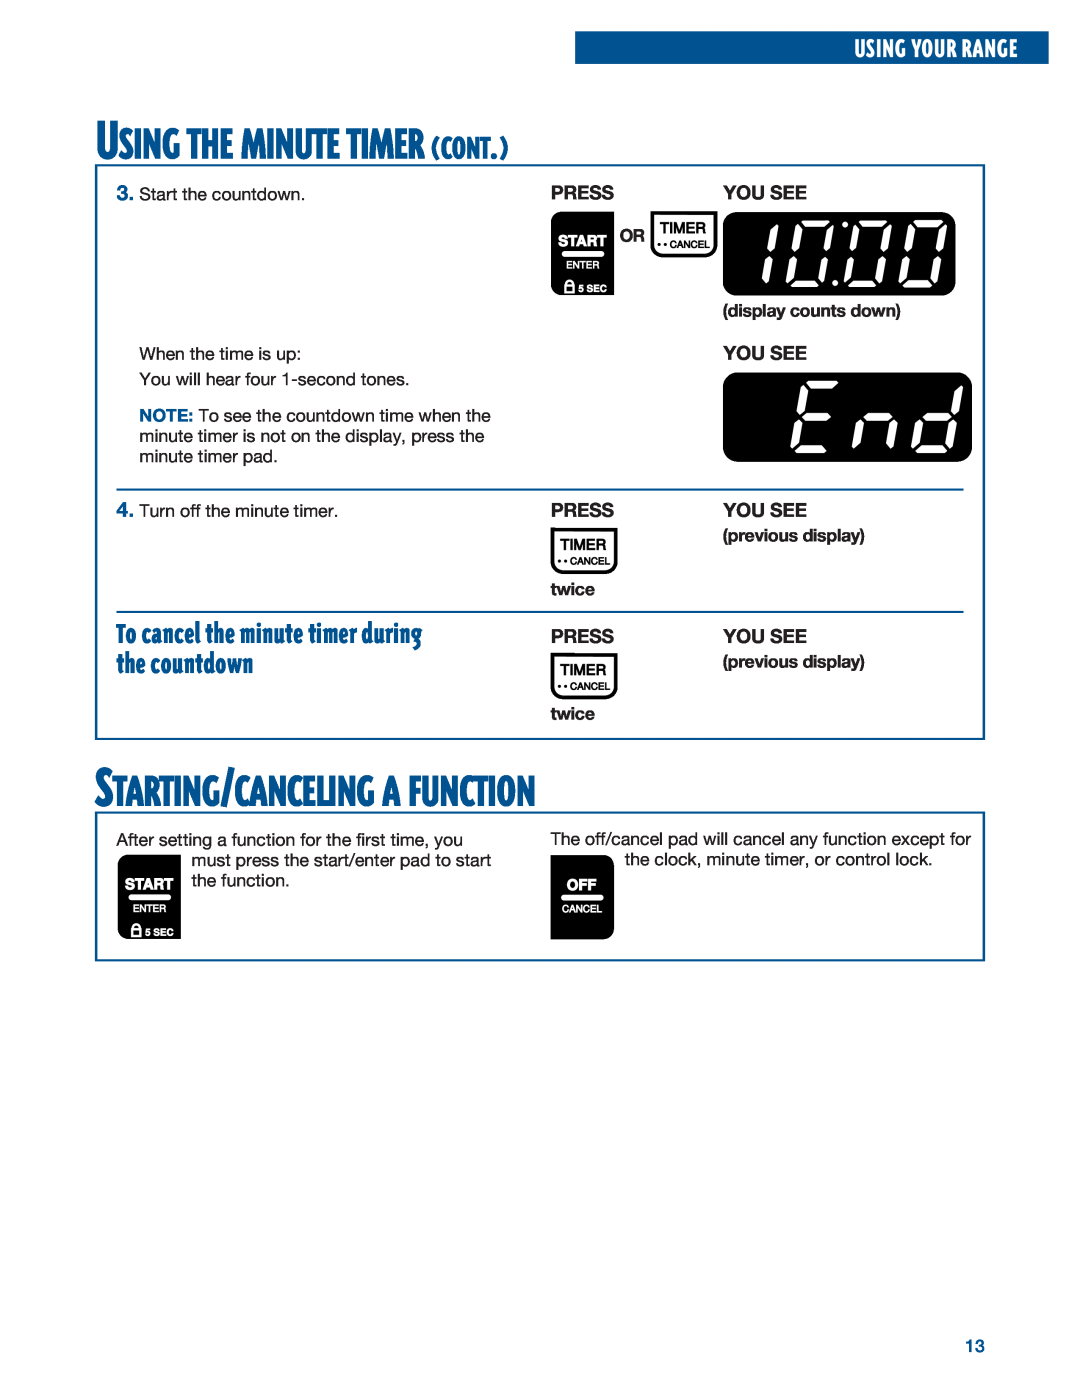 Whirlpool RF315PXE warranty Using The Minute Timer Cont, Starting/Canceling A Function, You See, Using Your Range, Press 